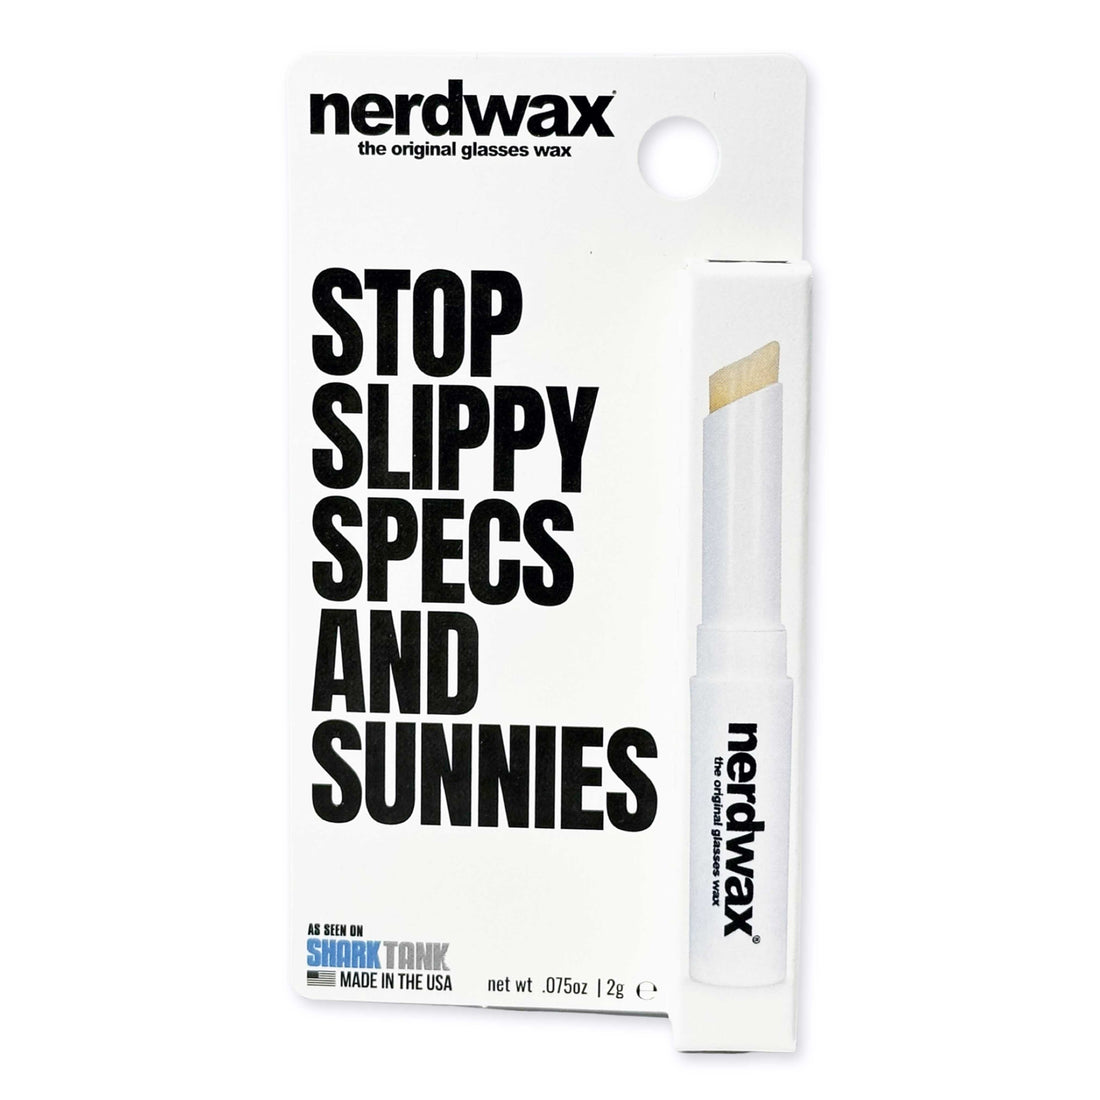 Nerdwax - Stop Slippy Specs & Sunnies, A wax to keep glasses from  sliding?! Will they bite??? 🦈, By Nerdwax